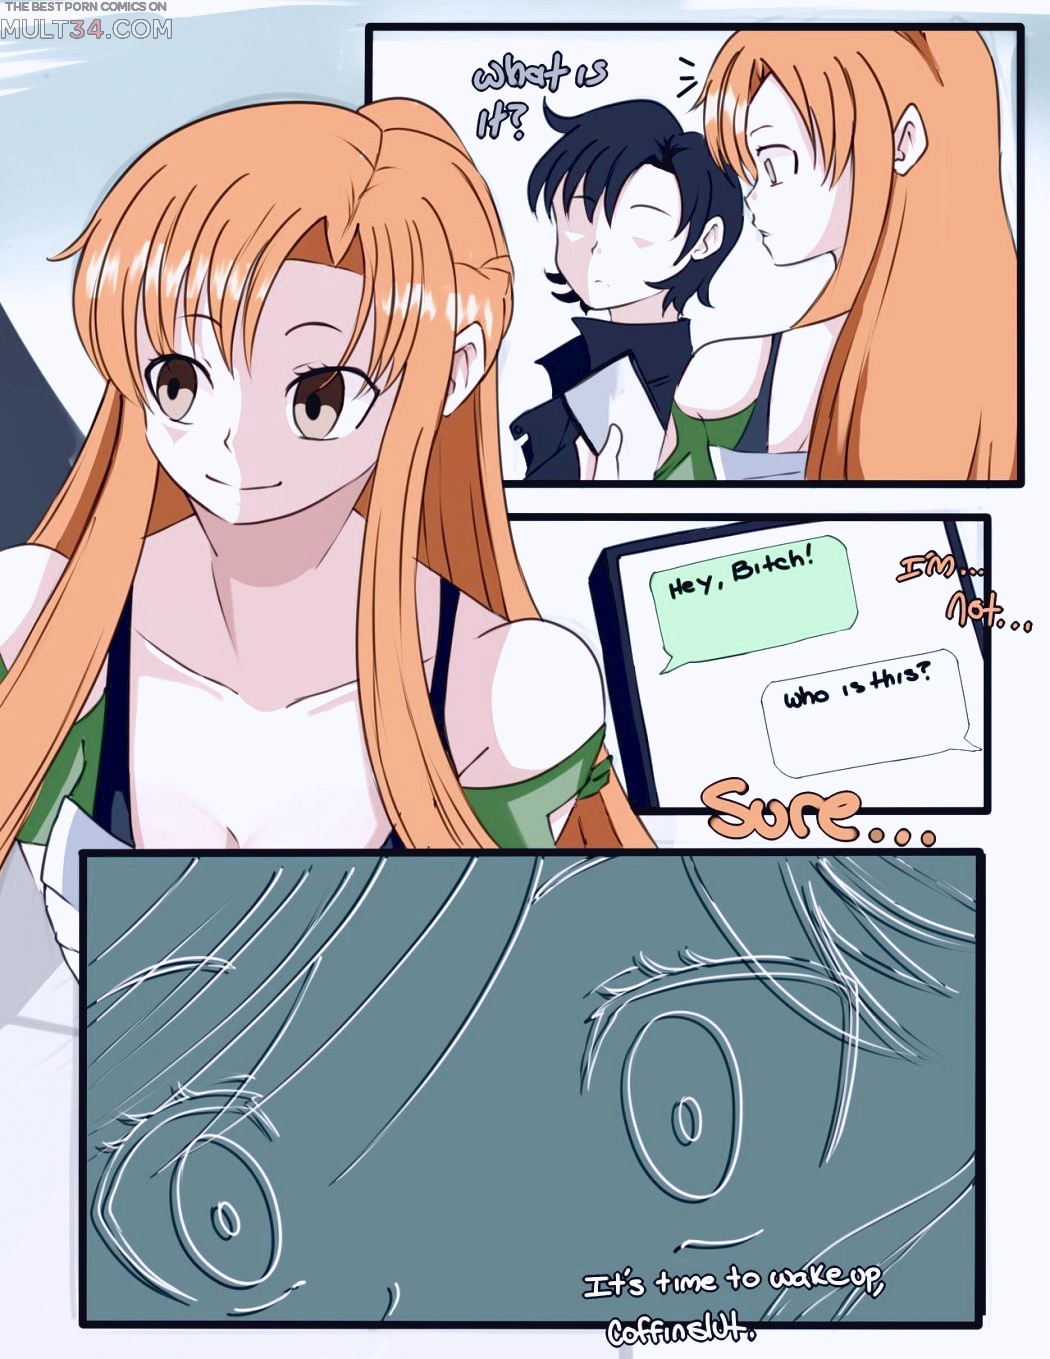 Corruption Online hentai manga page 1 on category Sword Art Online